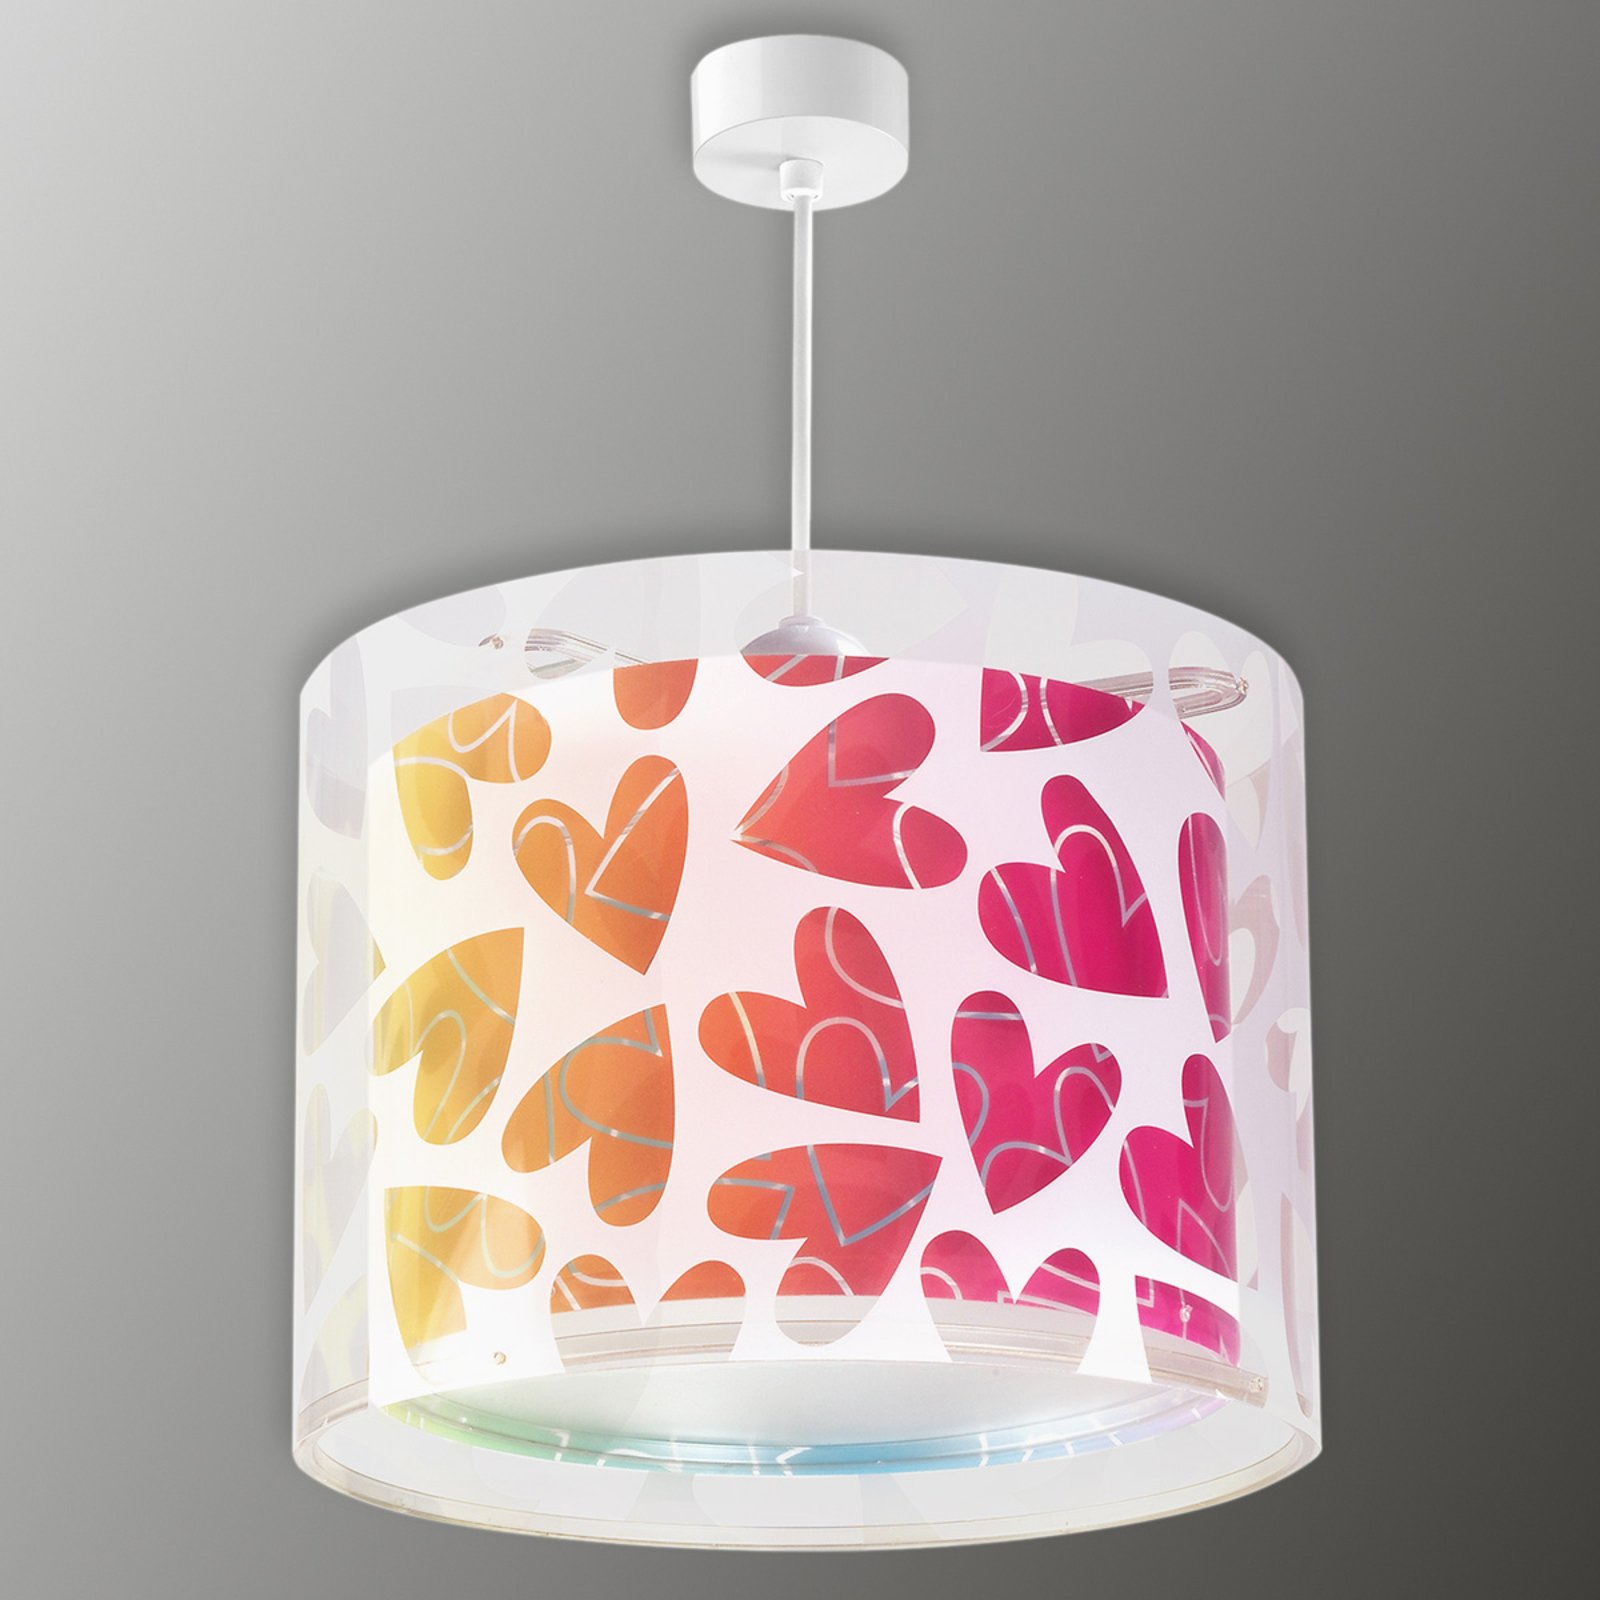 Children's hanging light Cuore decorated with hearts